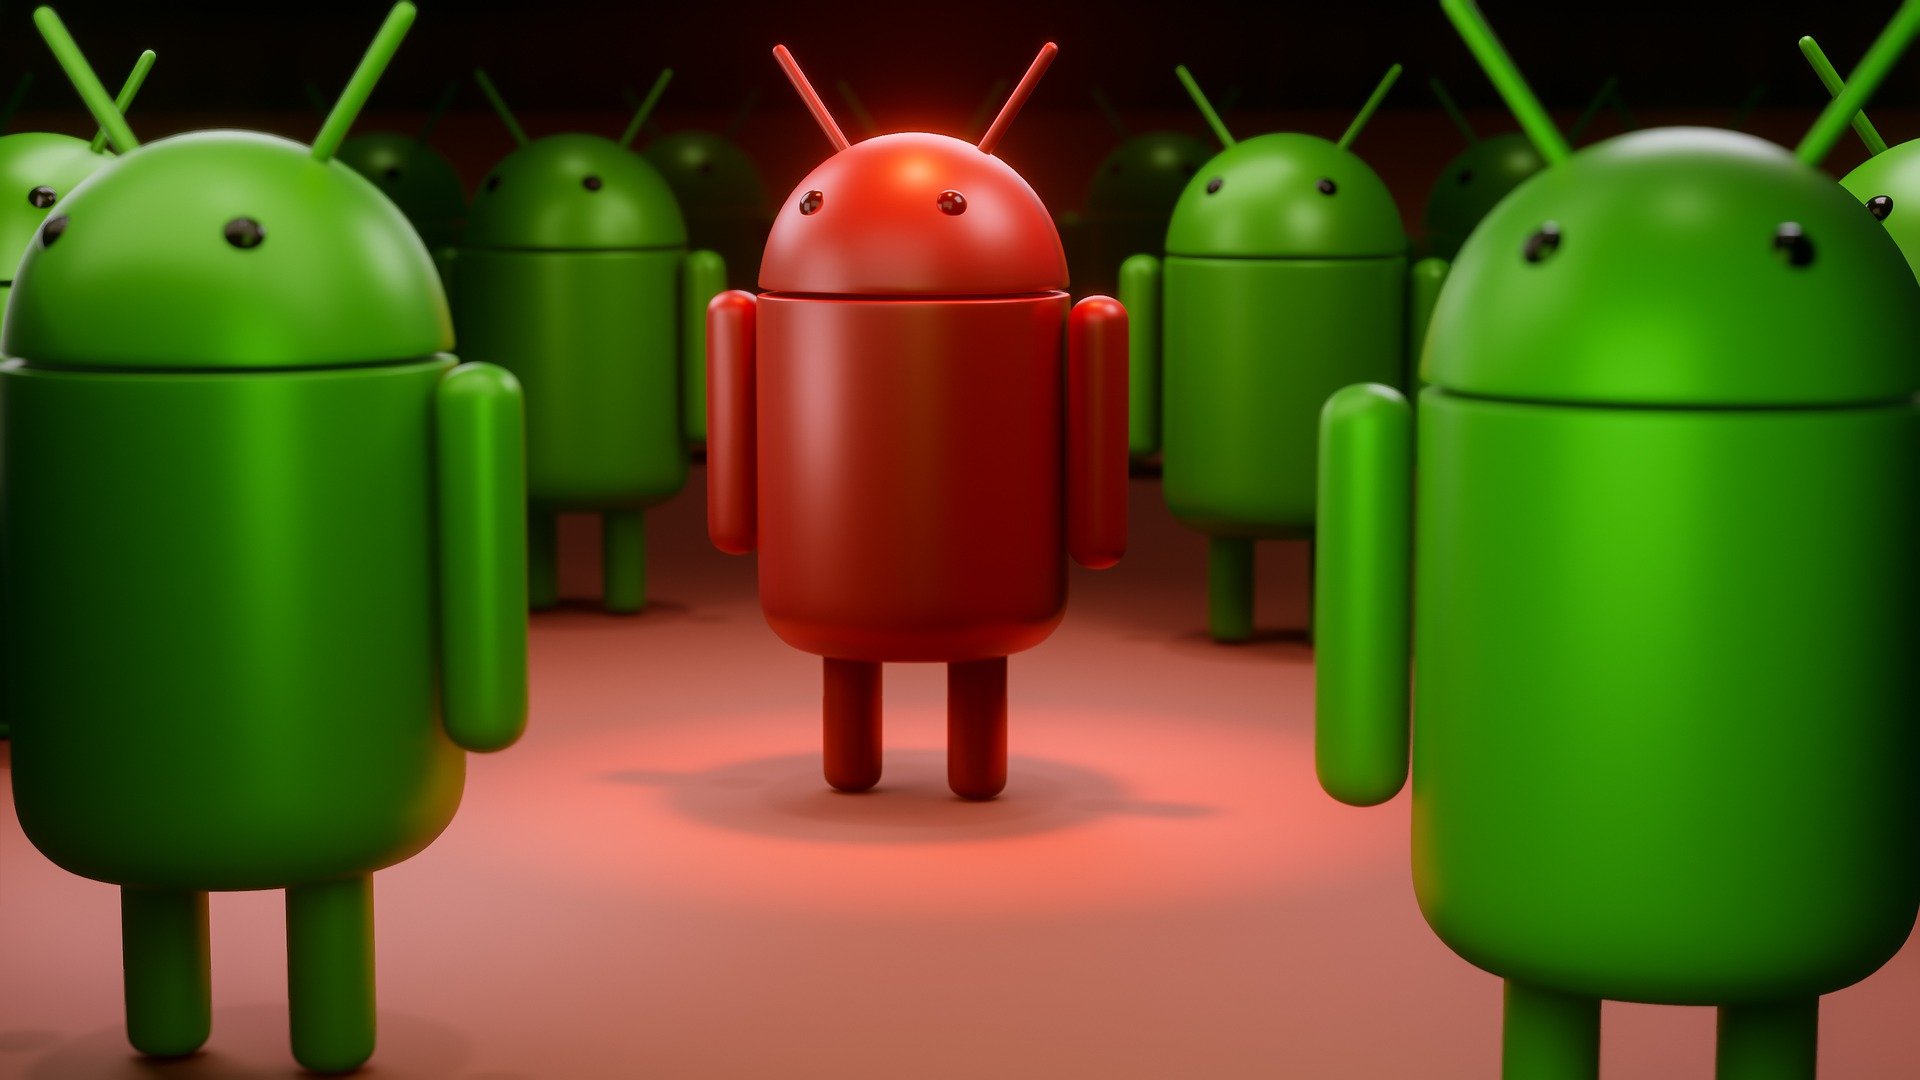 A good number of Android users still use third-party custom ROMs 